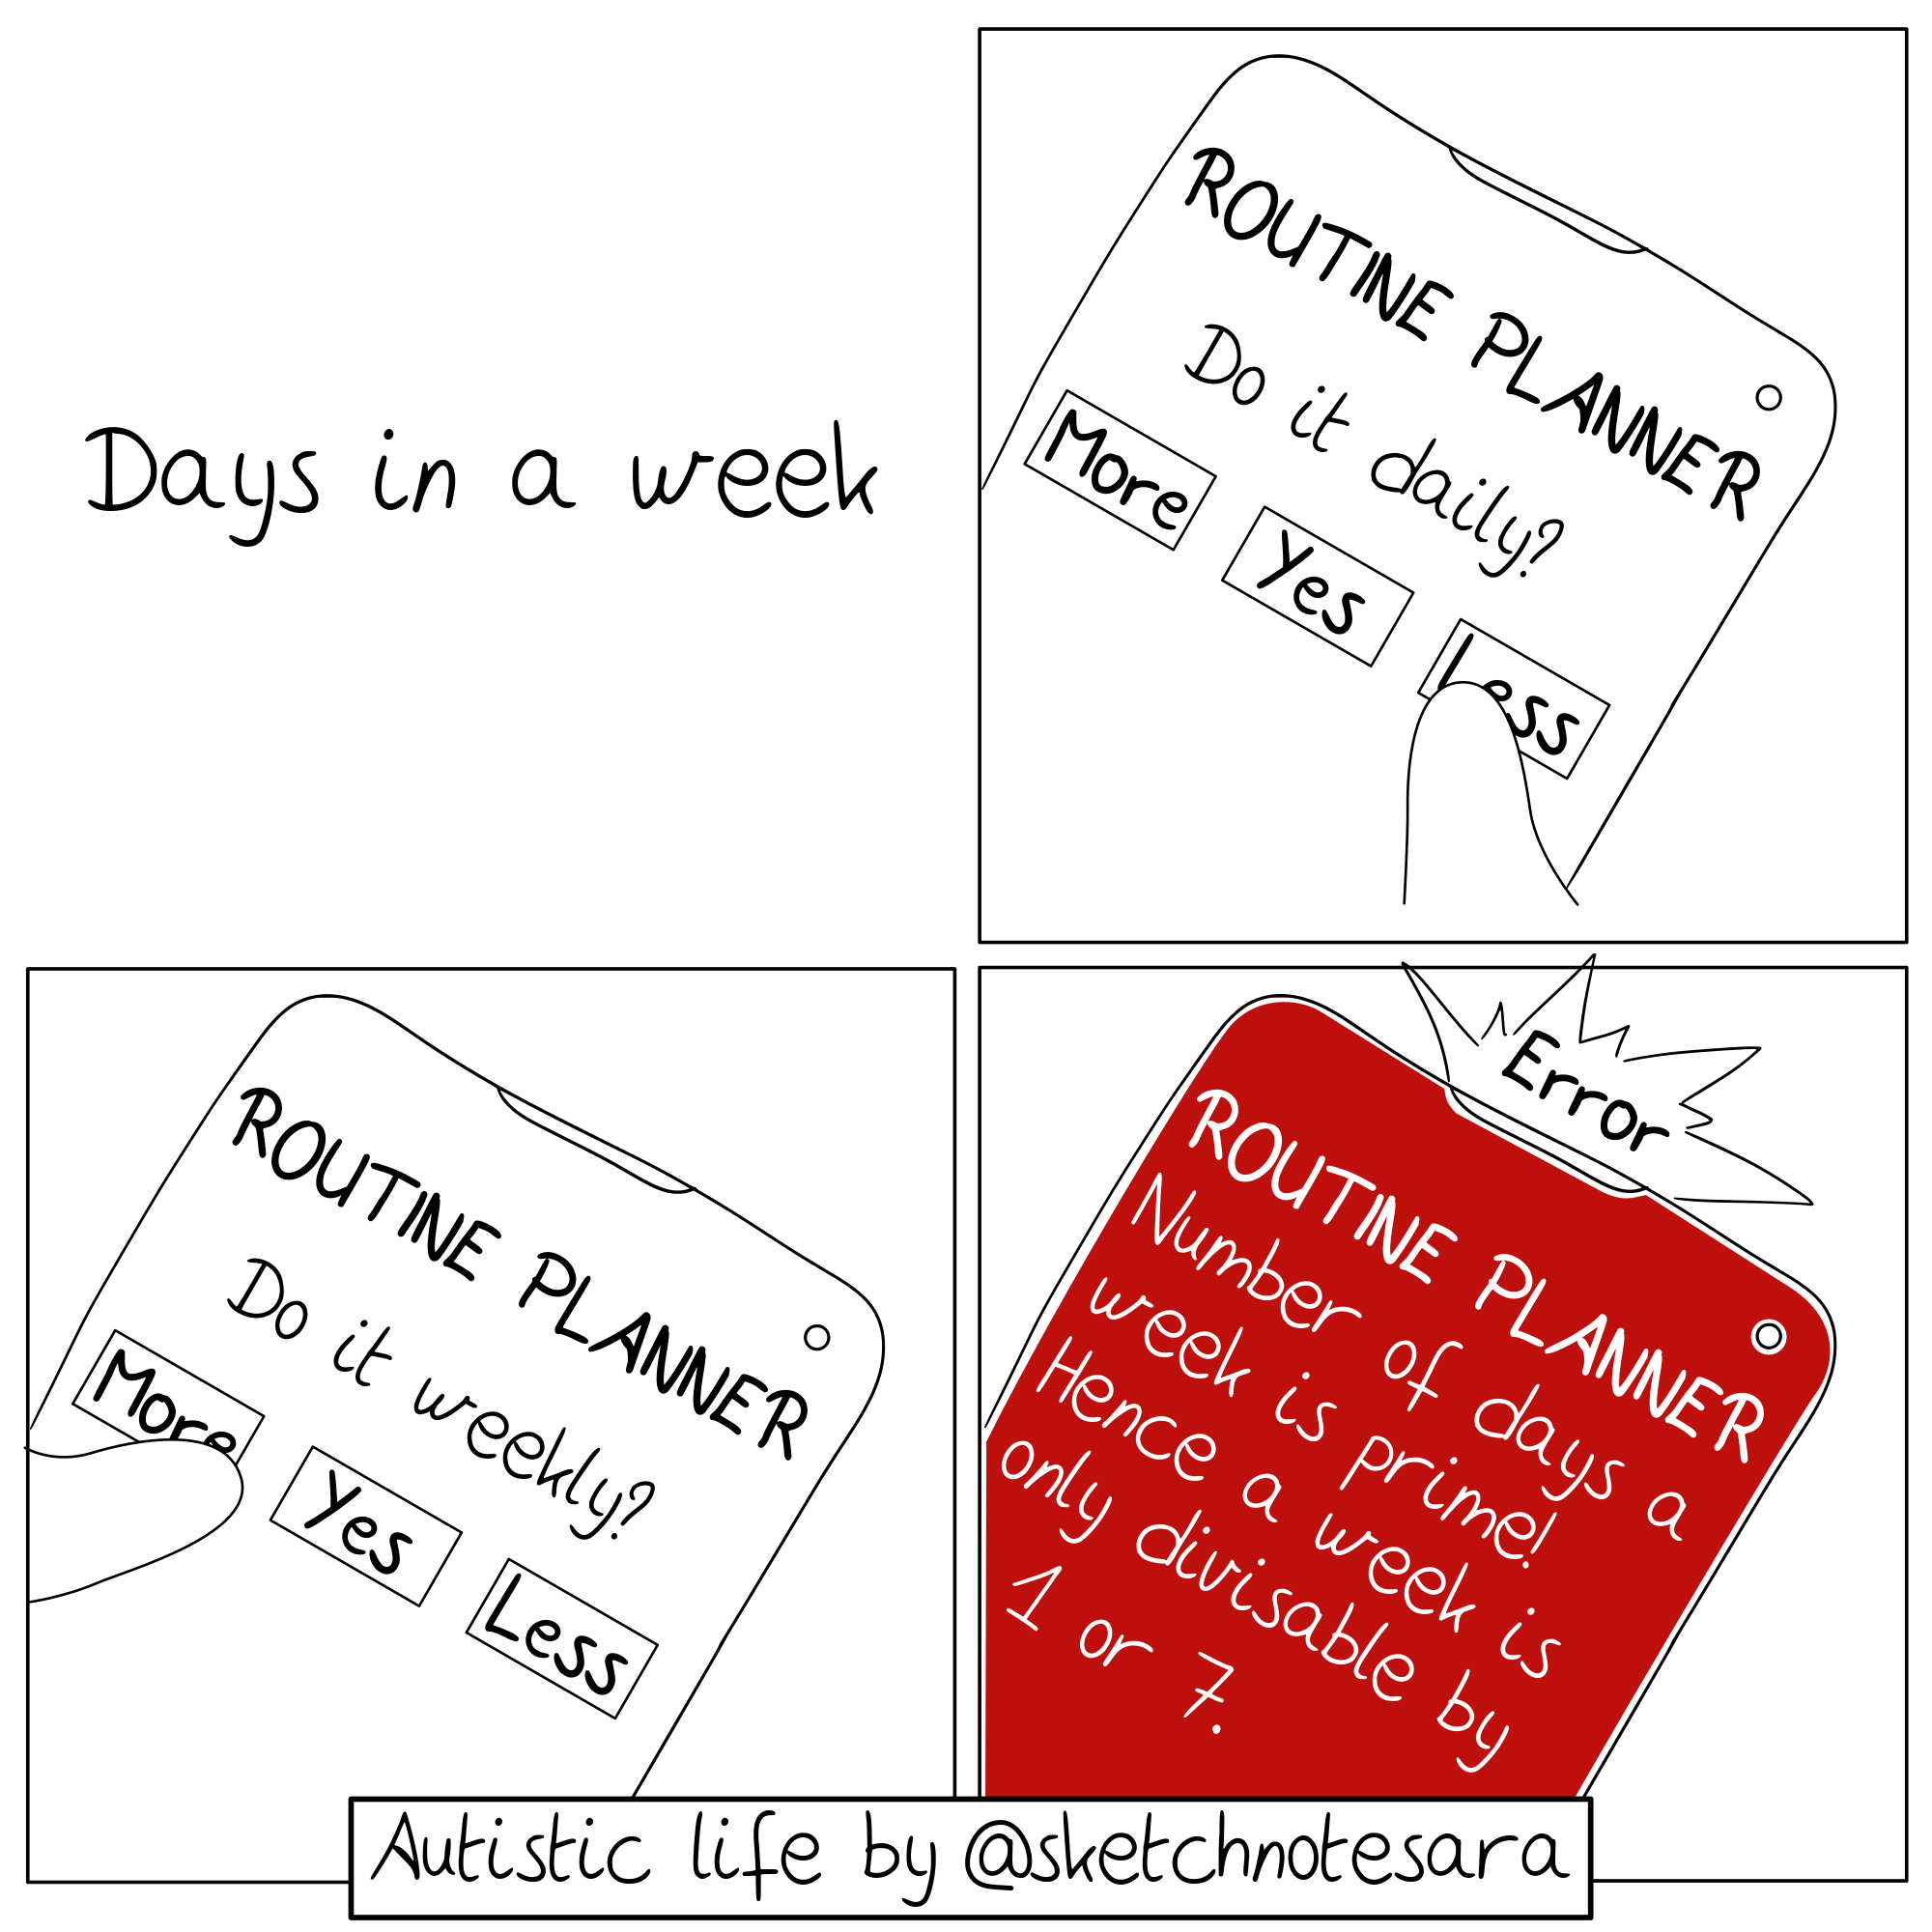 Sketchnote of Comics about routines and plans as an autistic